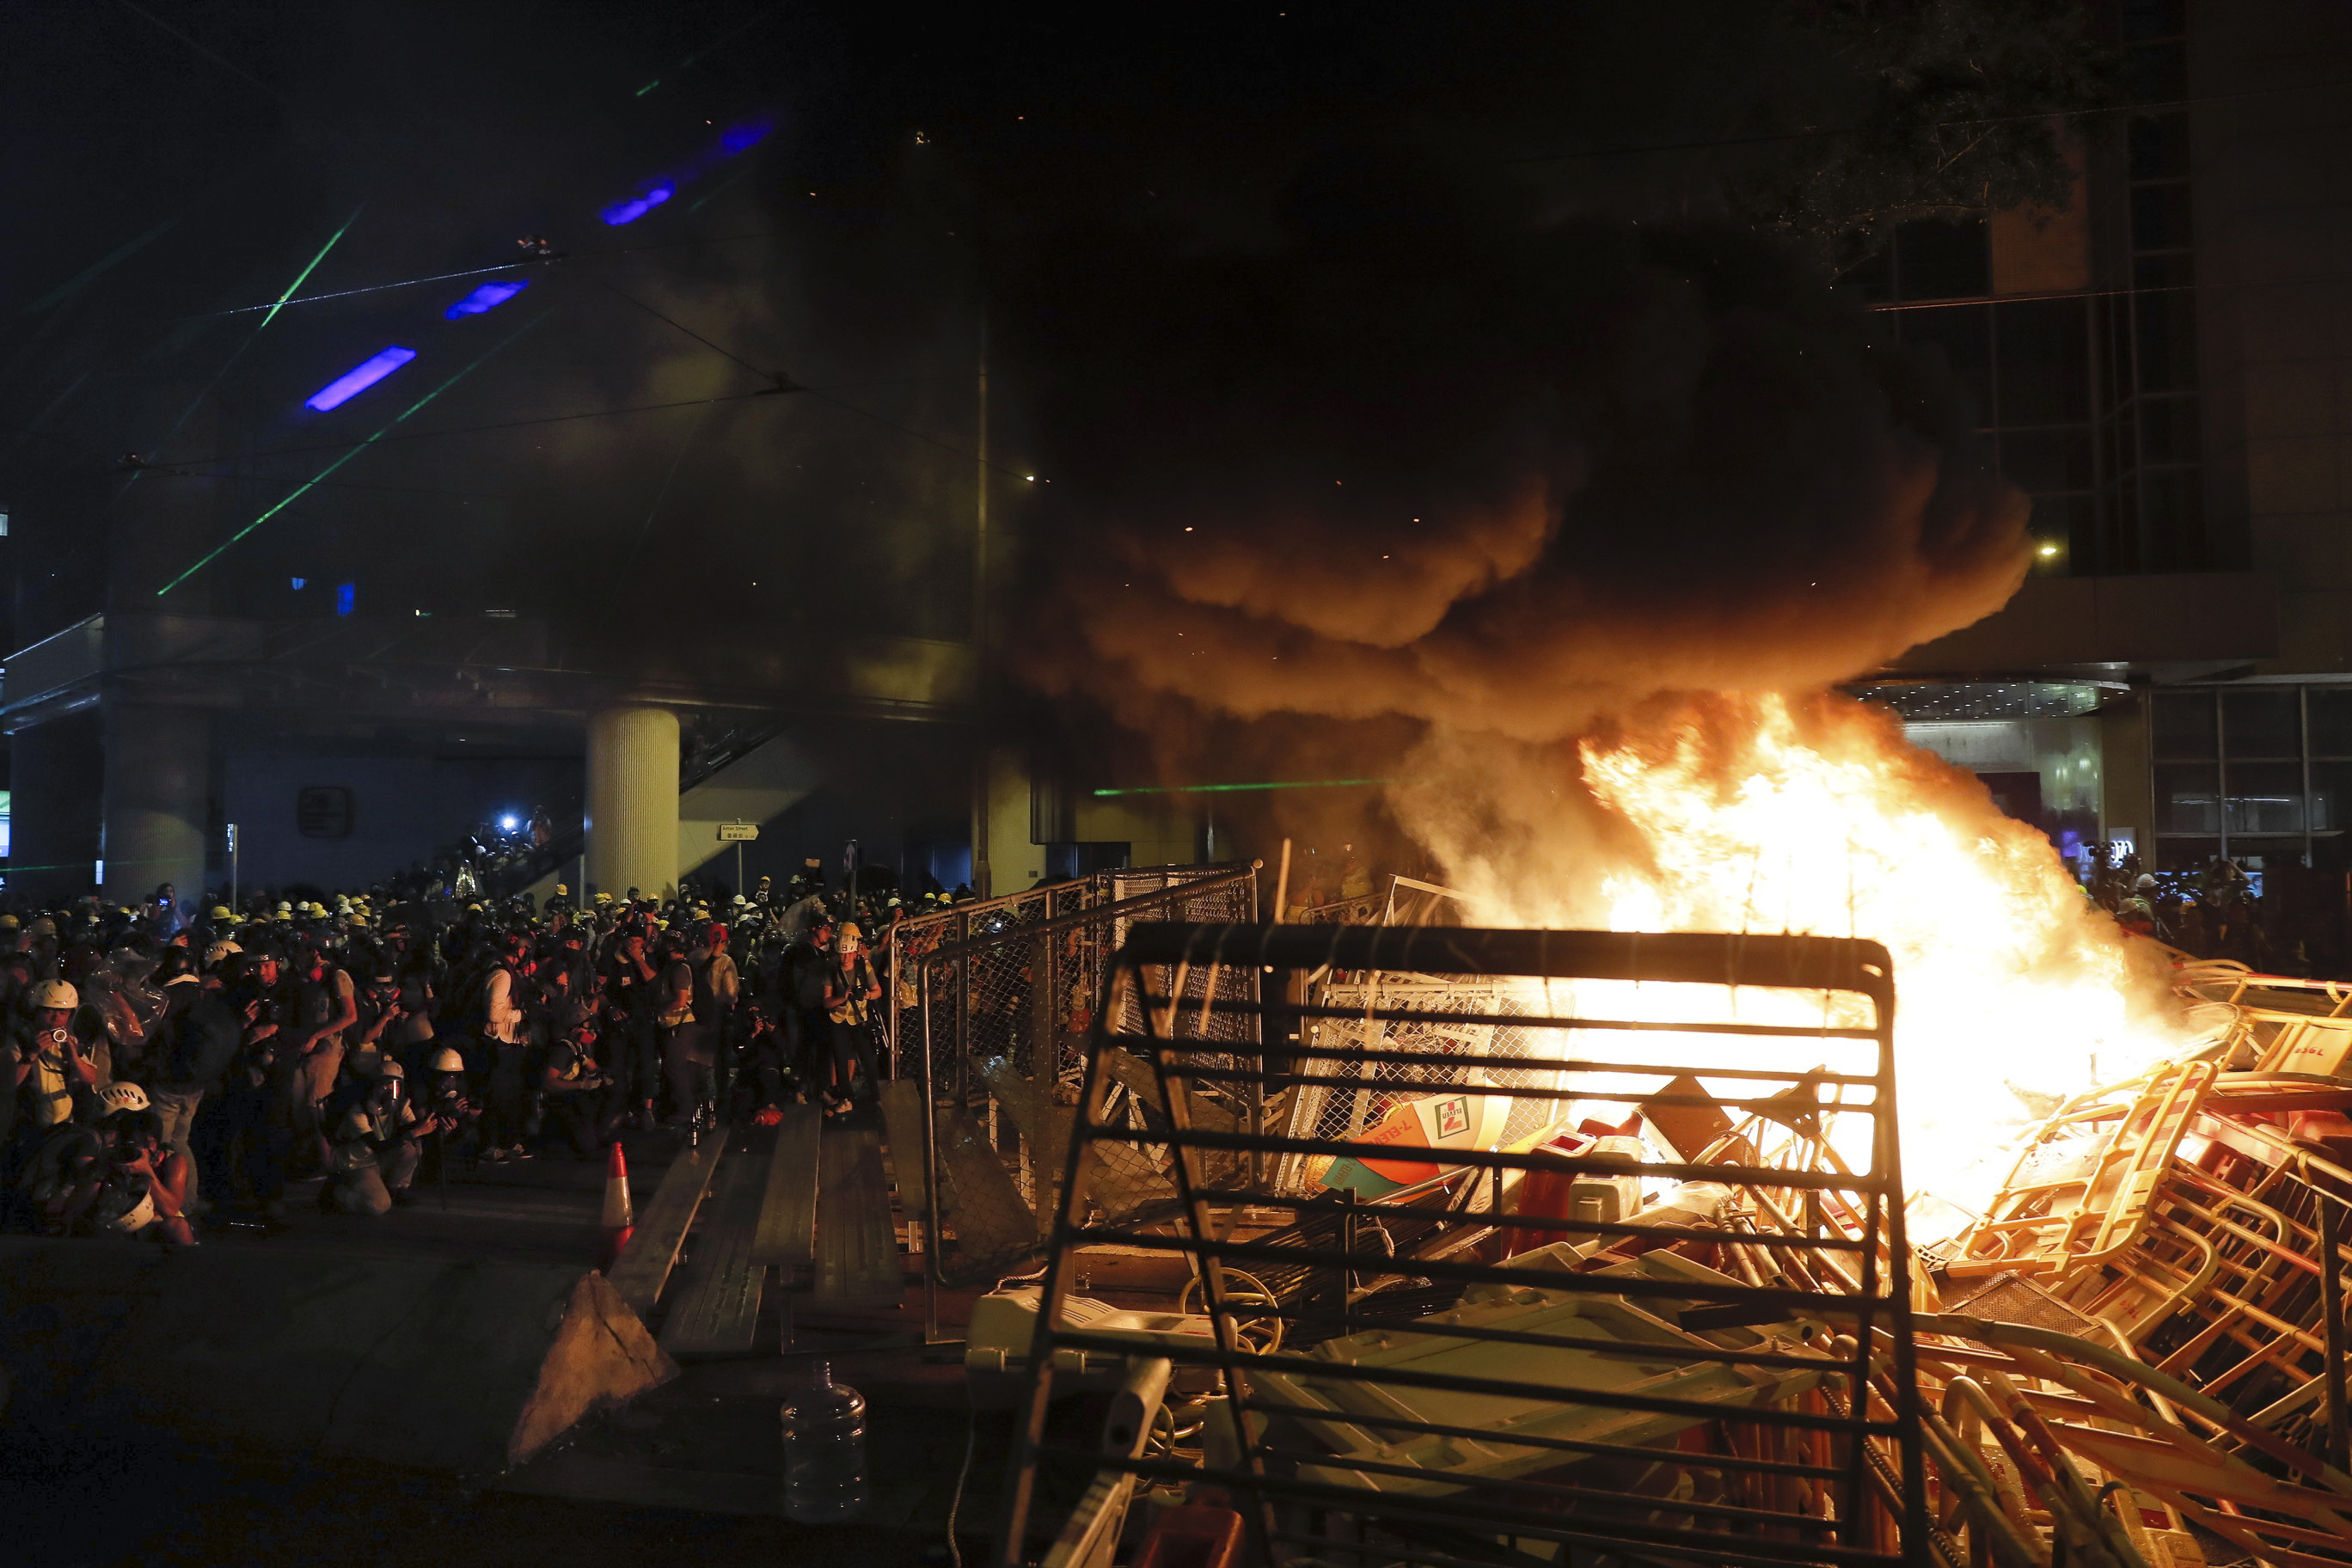 A fire from the August 31 protest march